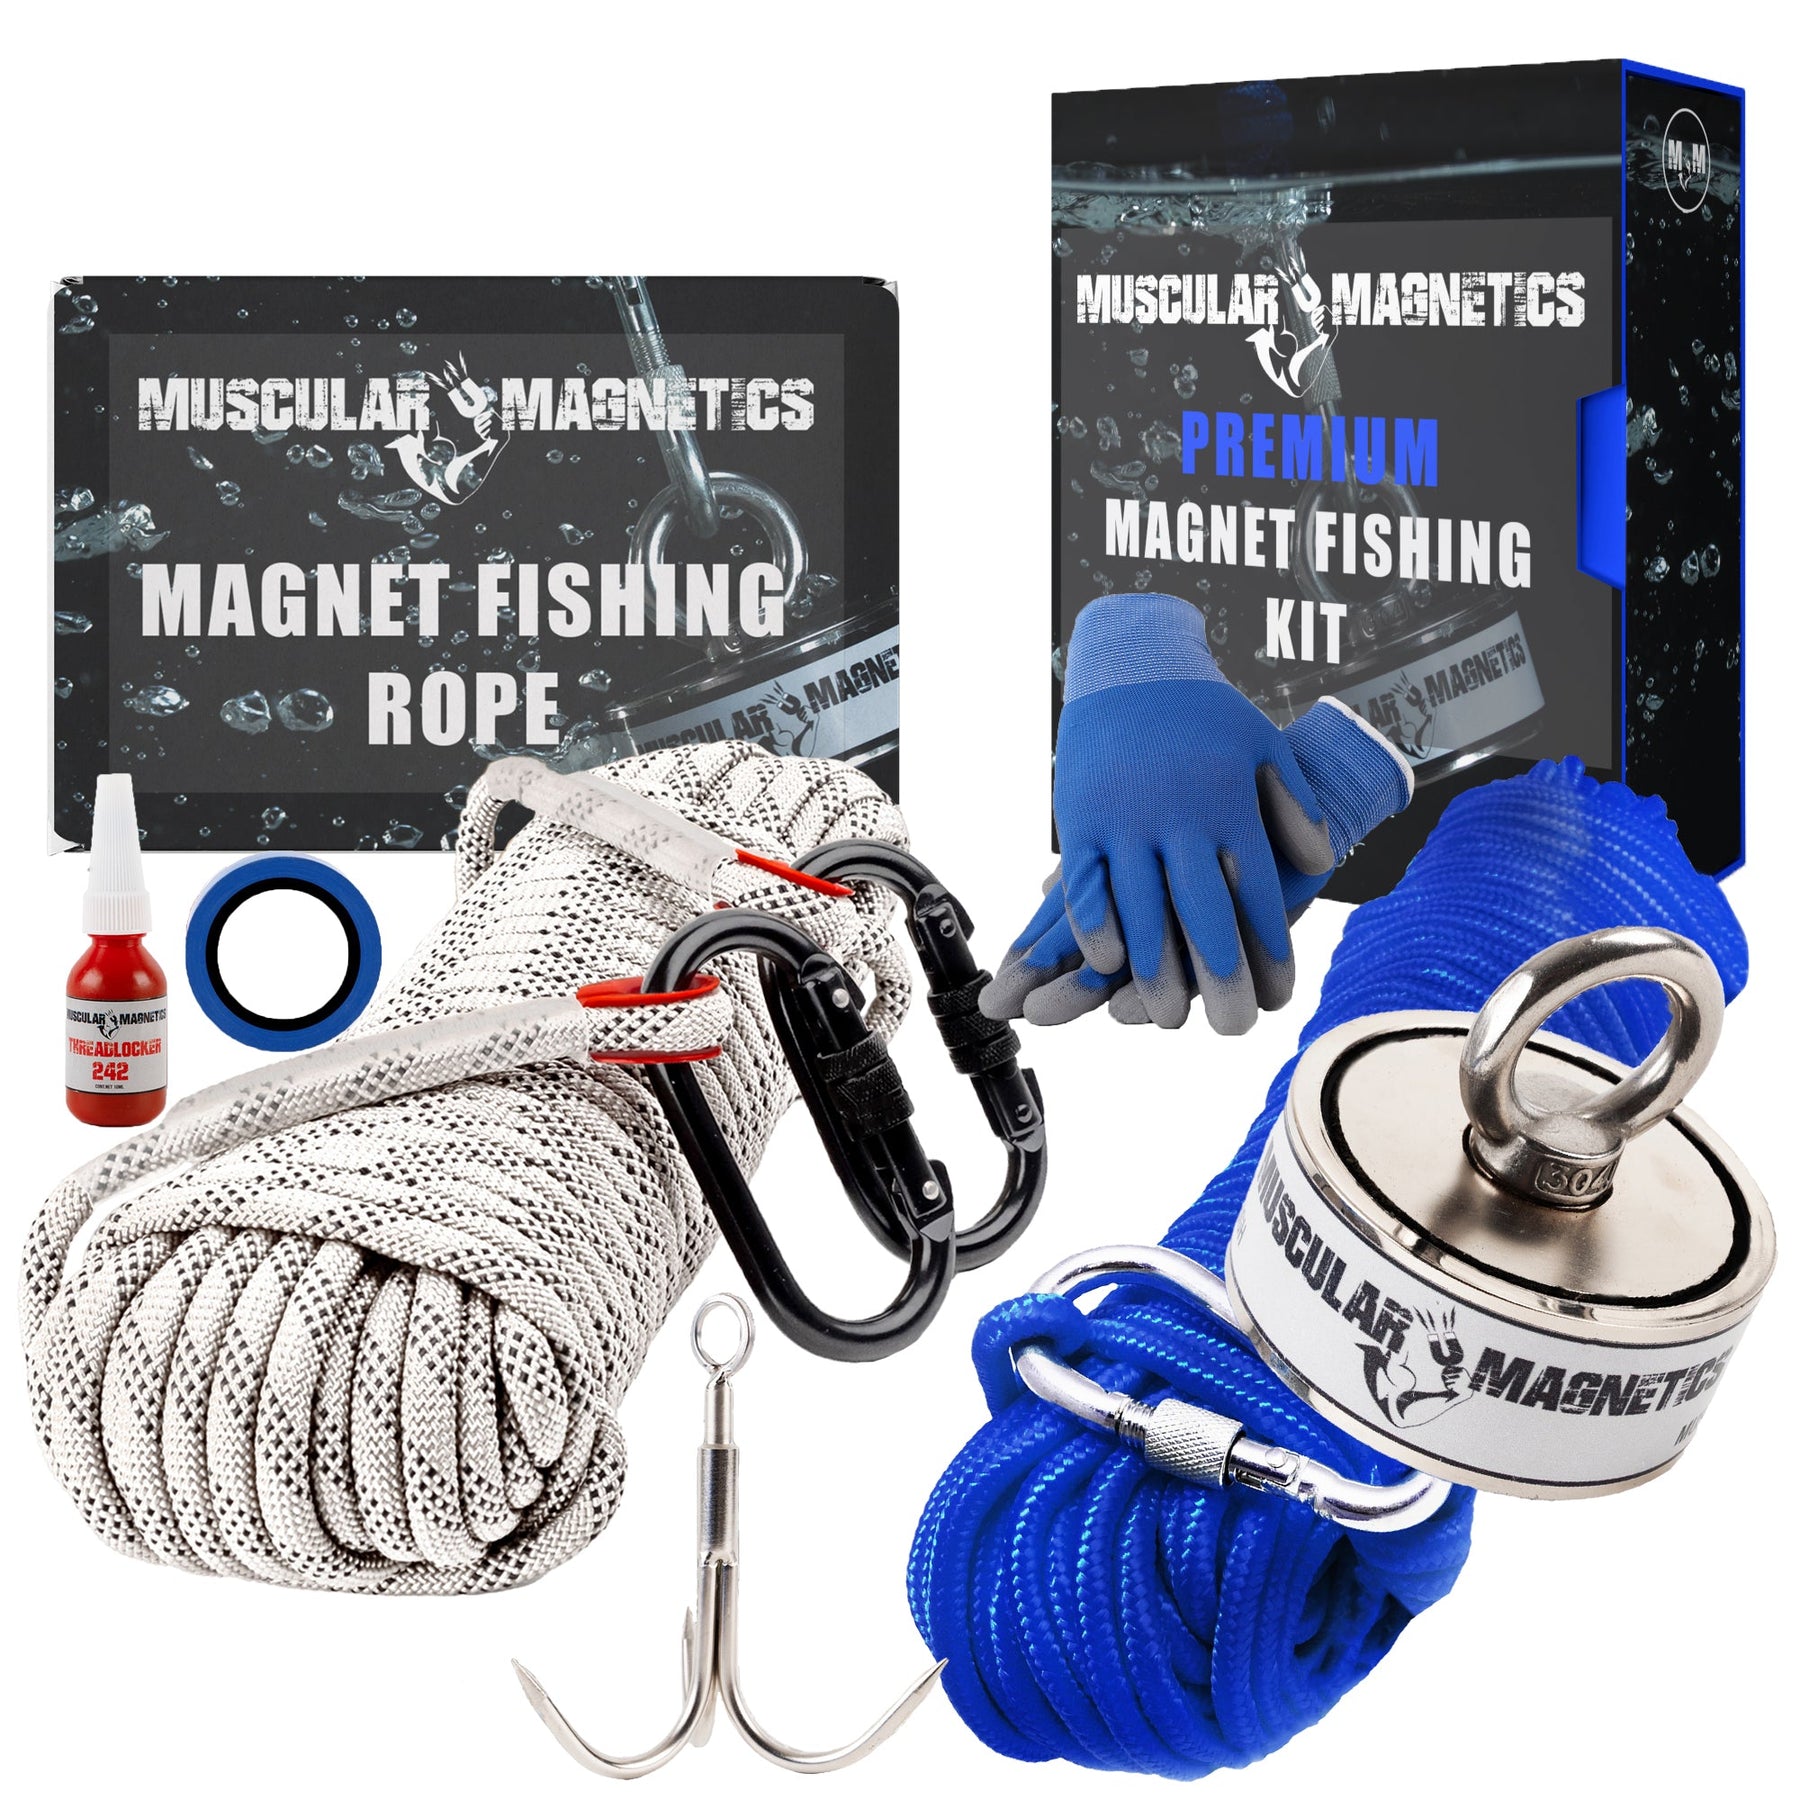 Let's Explore Magnet Fishing - Radial Magnets - We Know Magnets